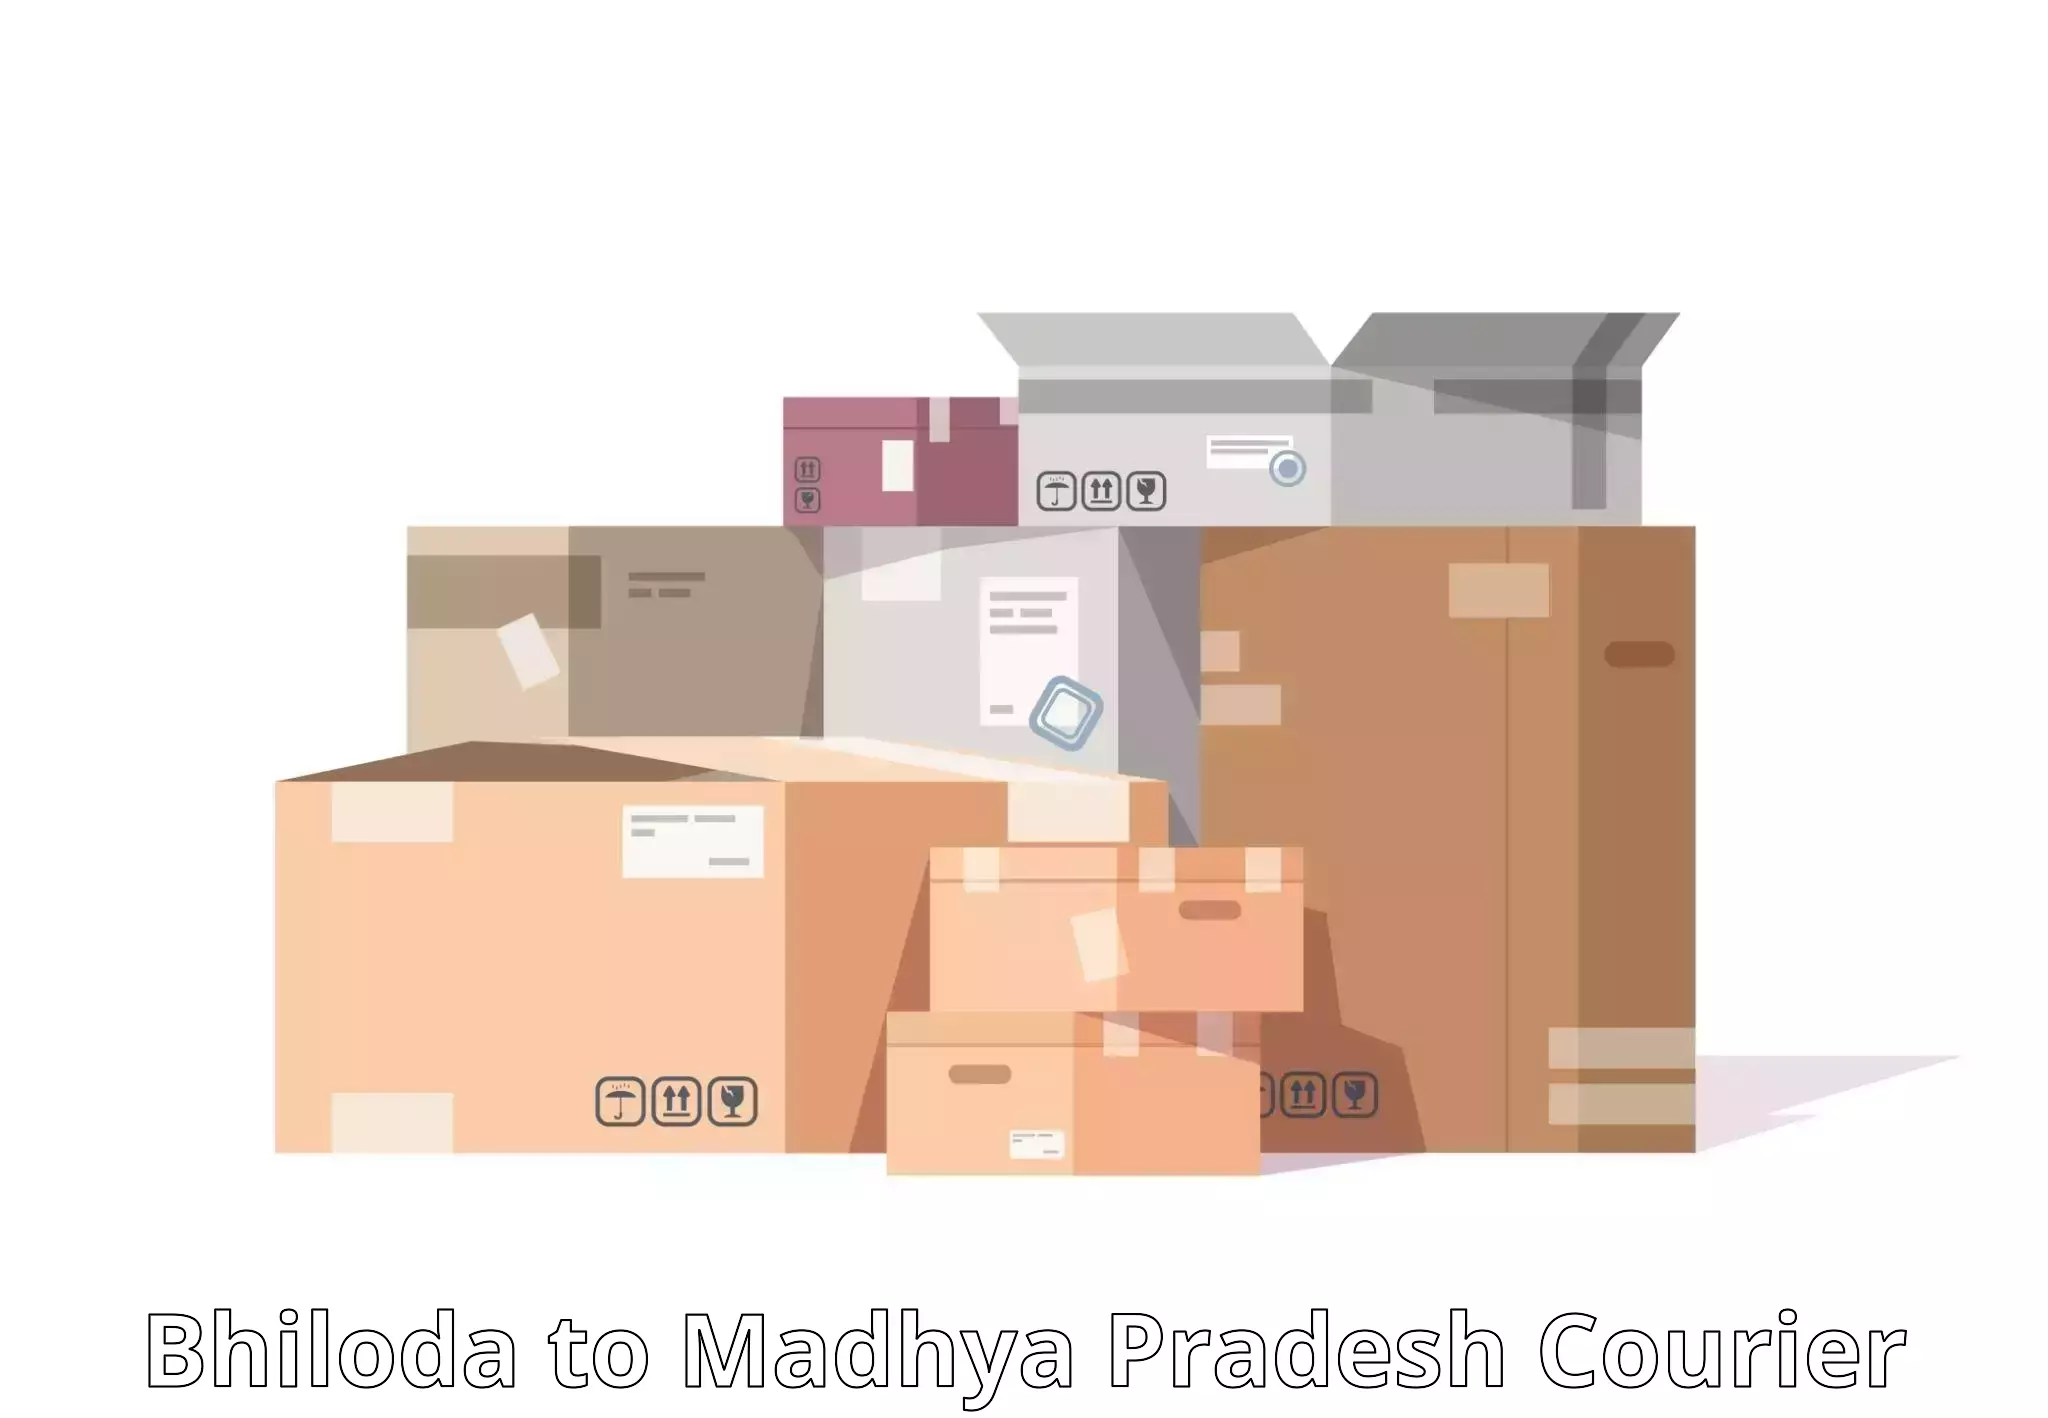 Package delivery network Bhiloda to Sendhwa